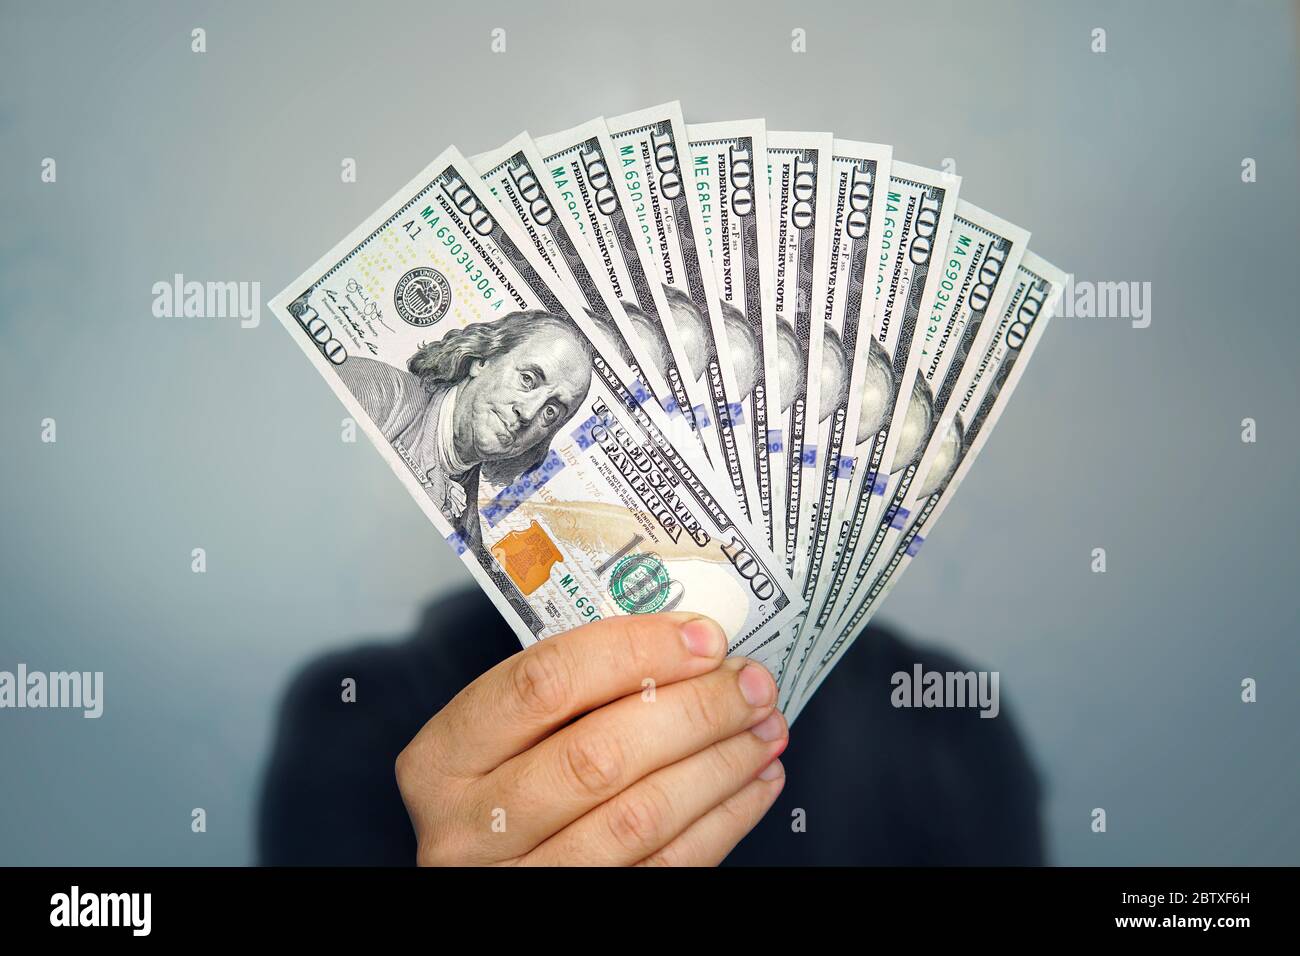 1000 dollars in 100 bills in a man's hand close-up on a dark background. Hands holding dollar cash Stock Photo